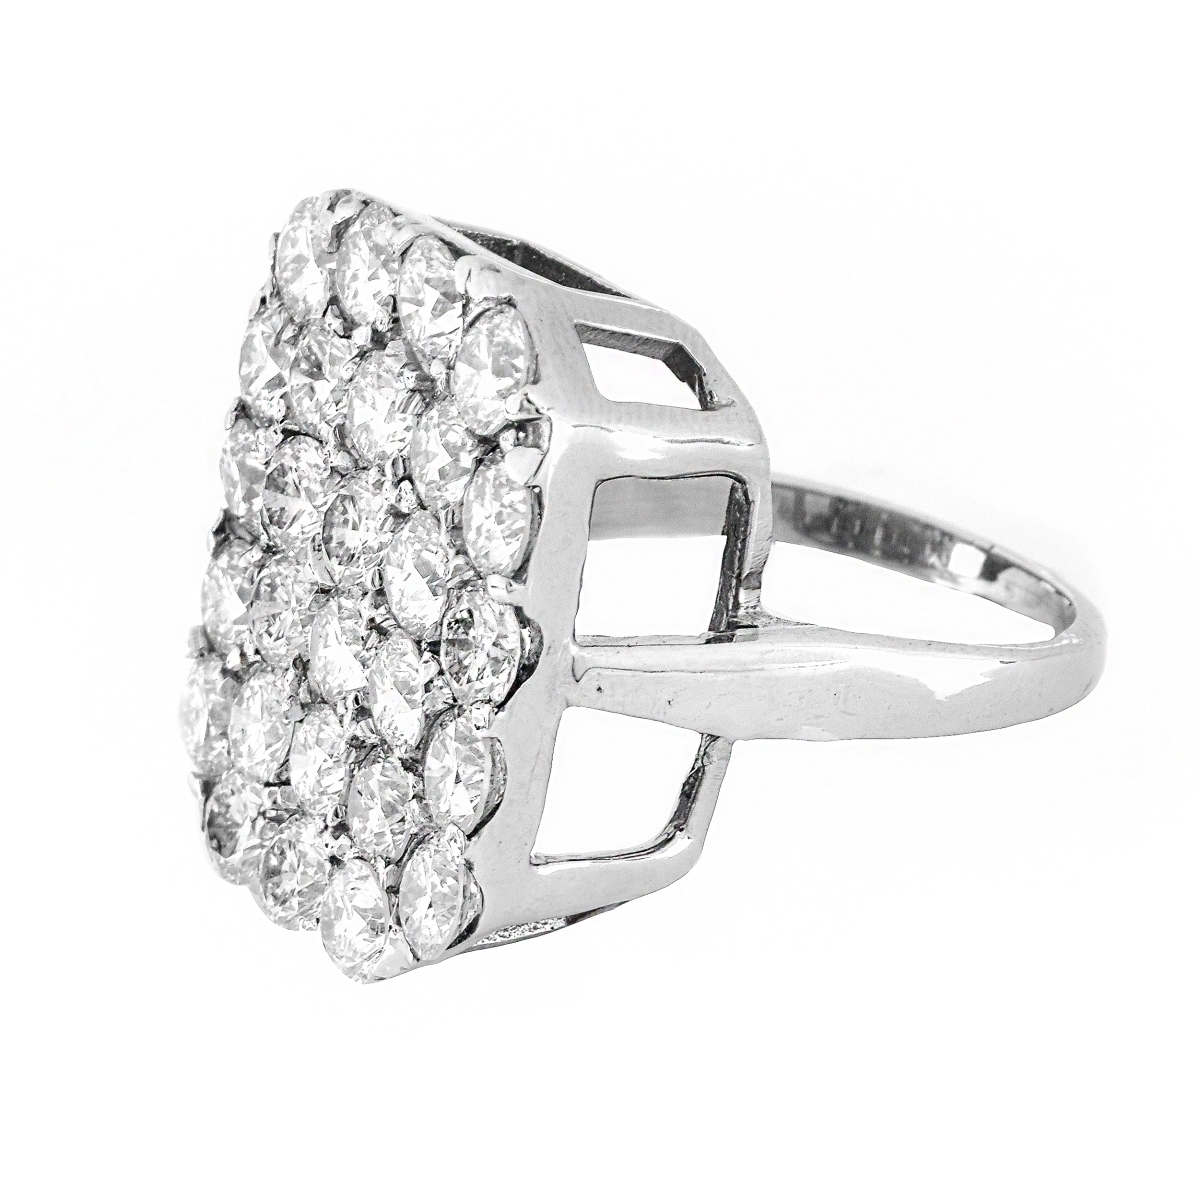 4.0ct Diamond and 14K Gold Ring